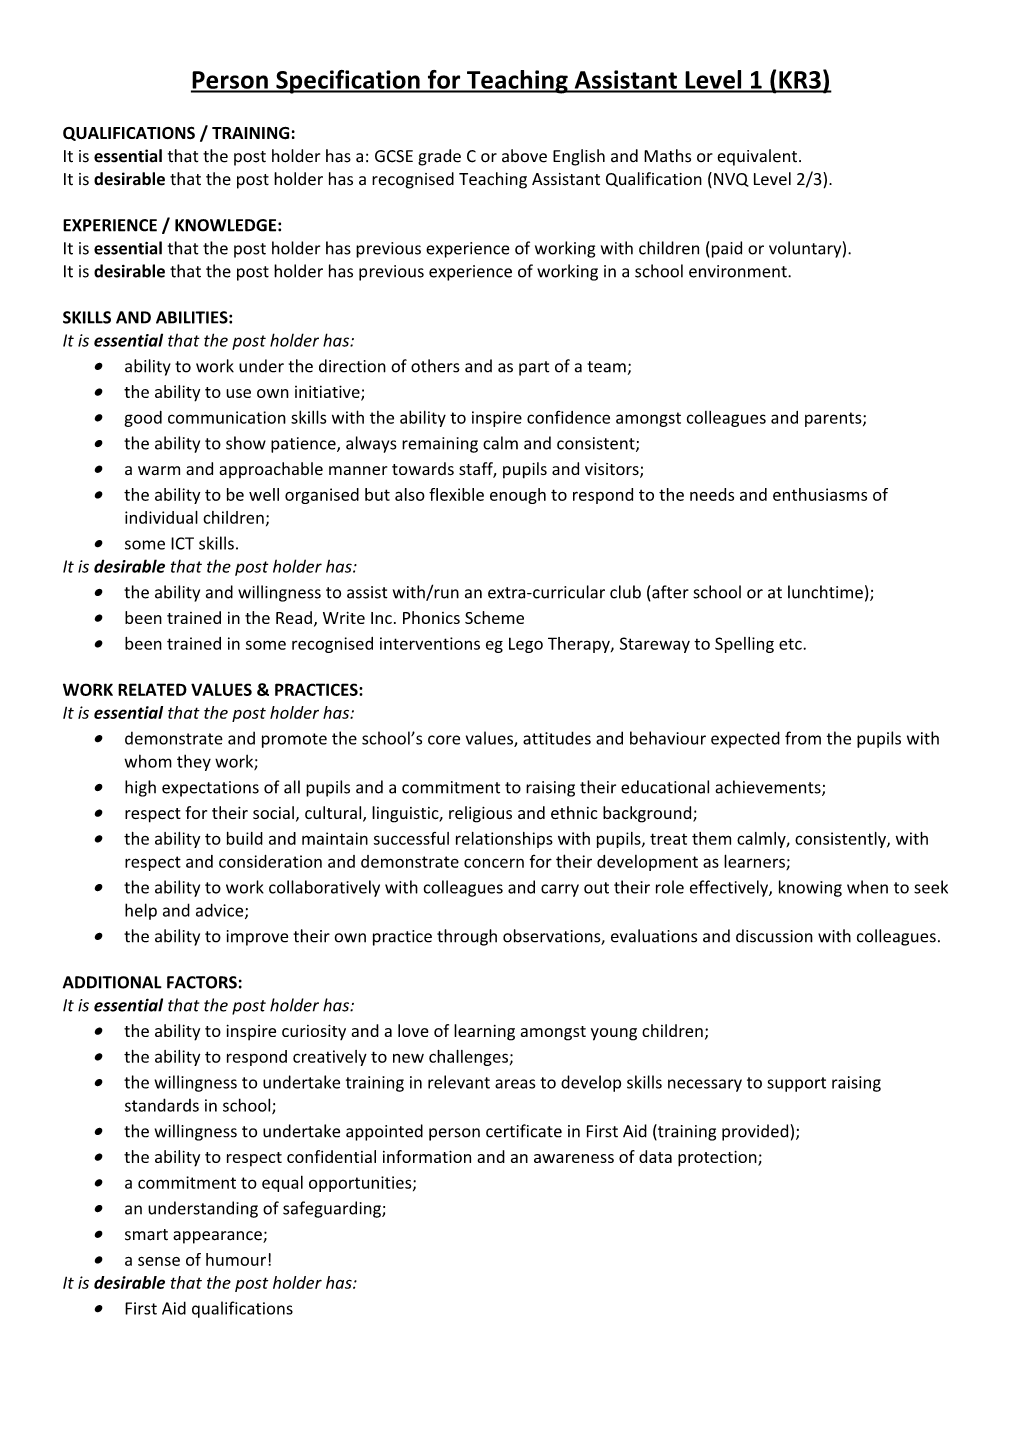 Person Specification for Teaching Assistant Level 1 (KR3)